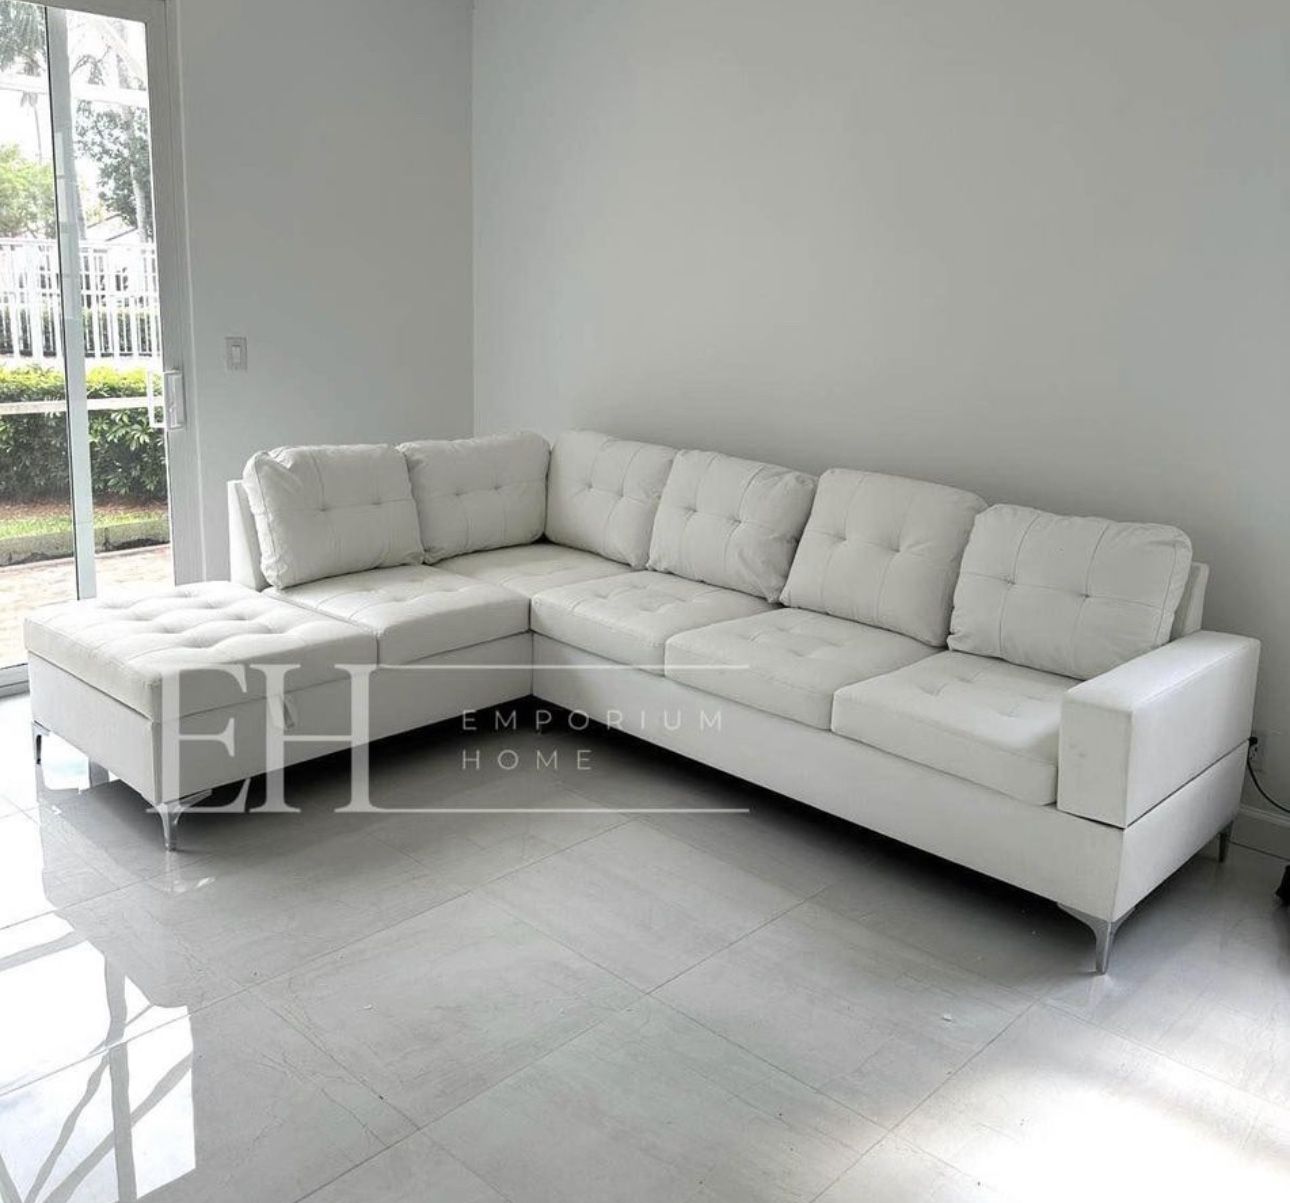 White Faux Leather Sofa Sectional With Cup Holders Available In 3 Colors 